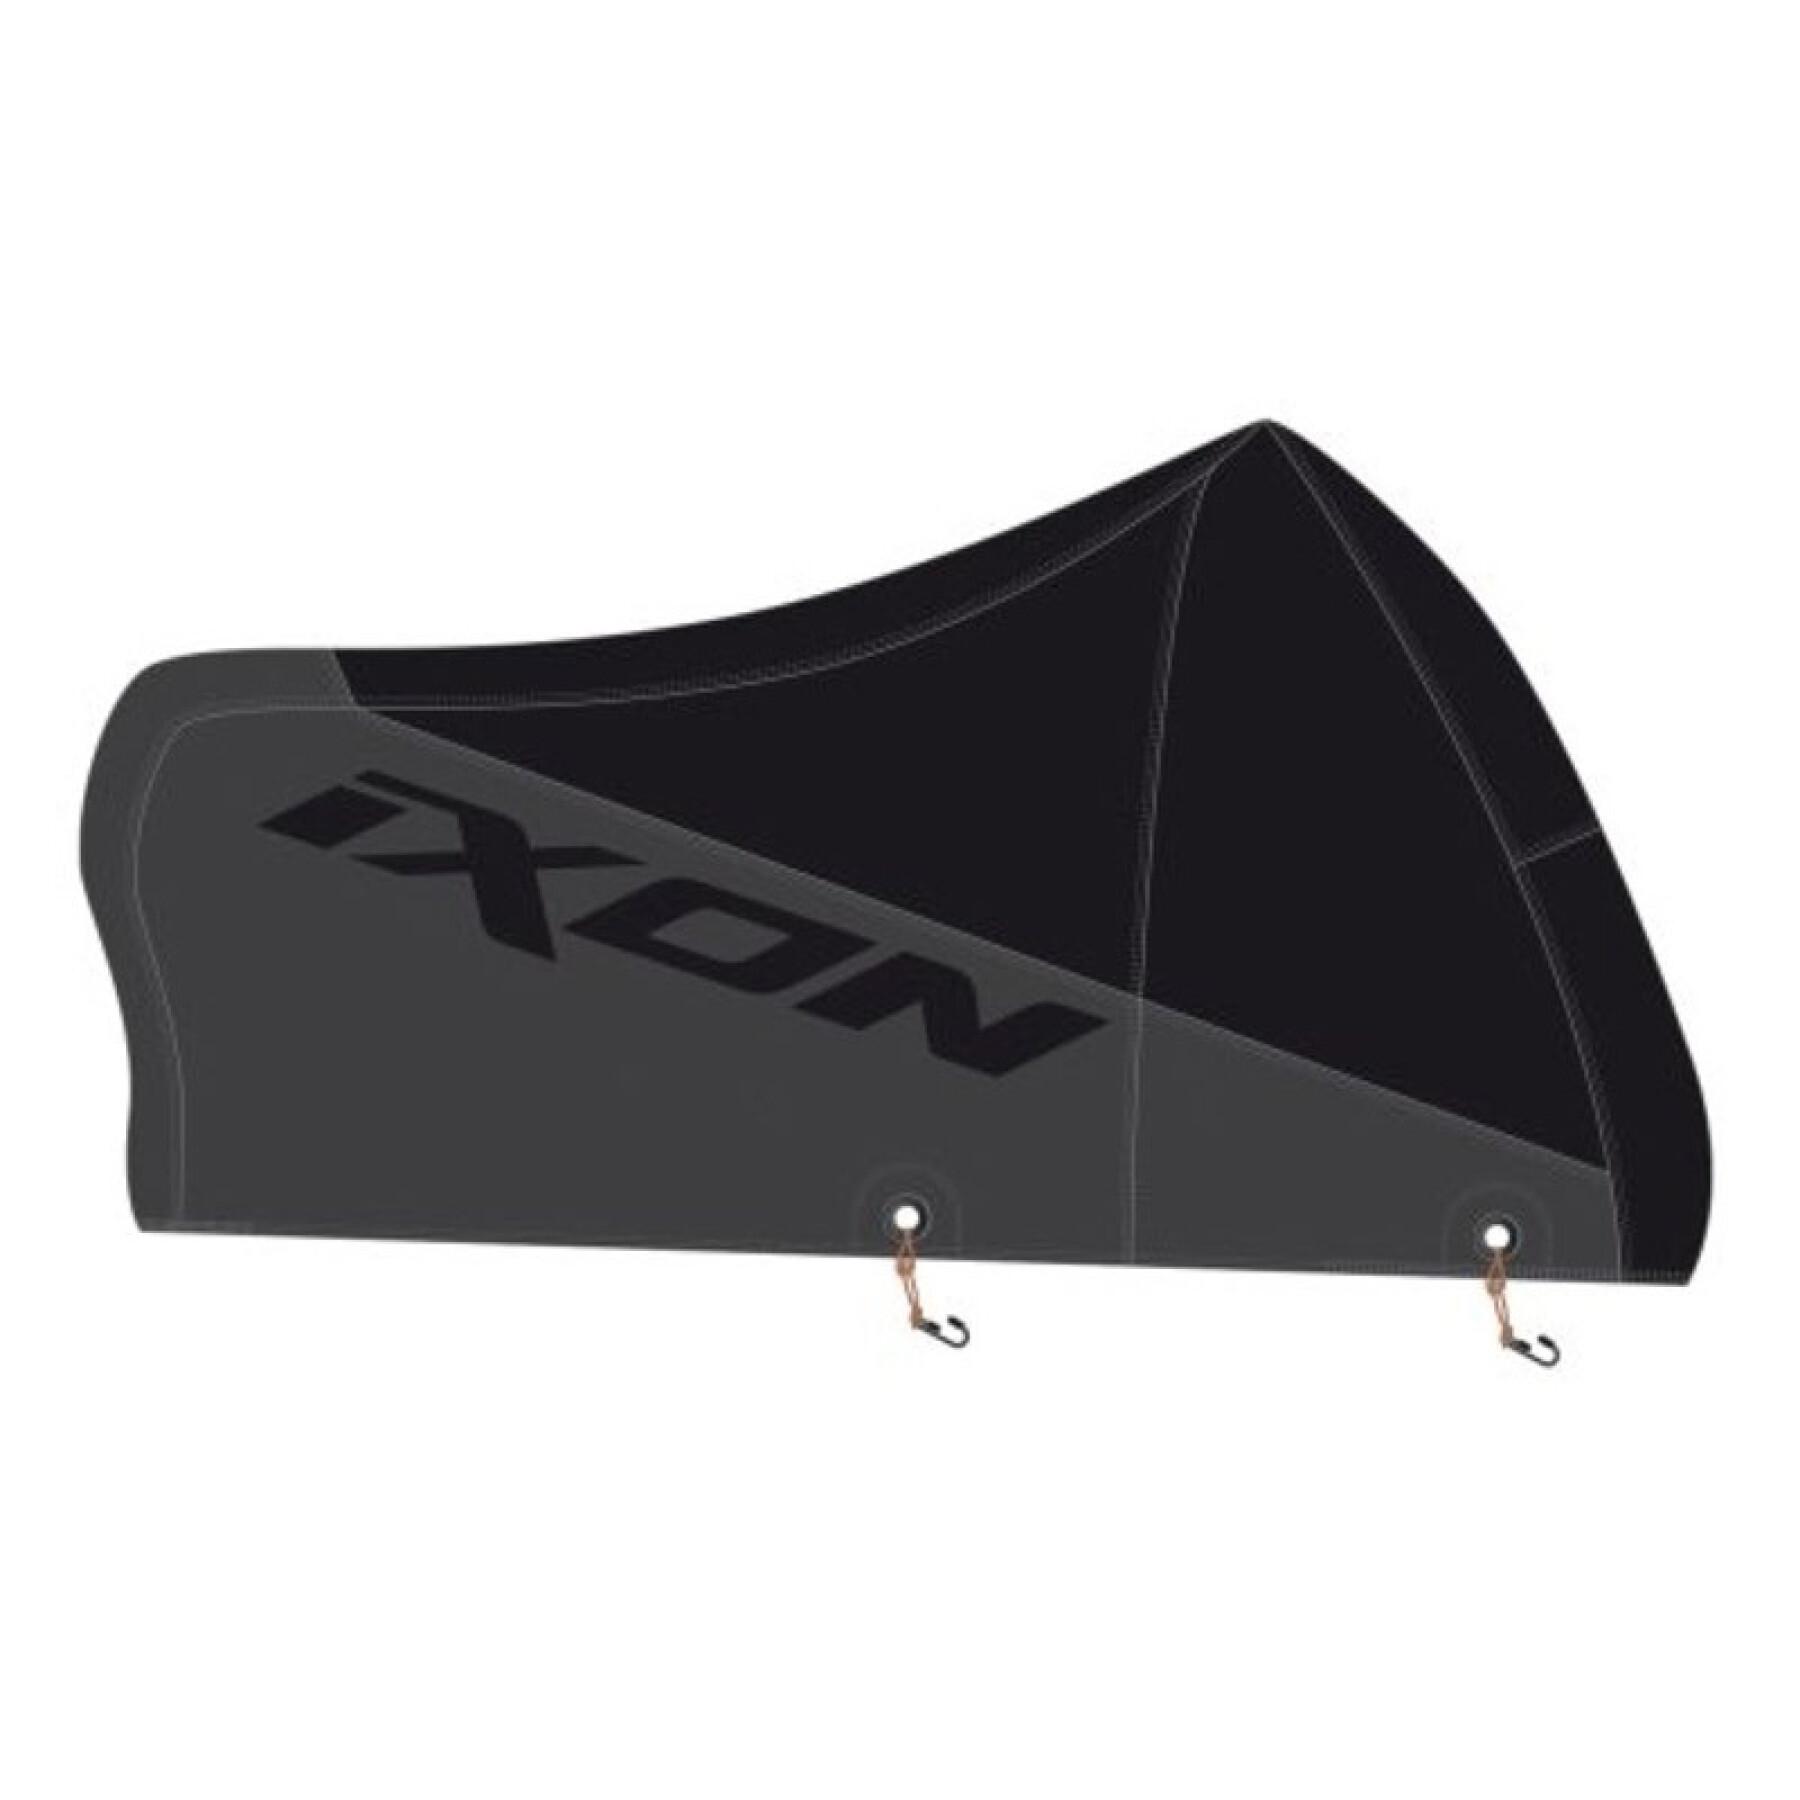 Motorcycle cover for 125/750cc roadster Ixon Blanky